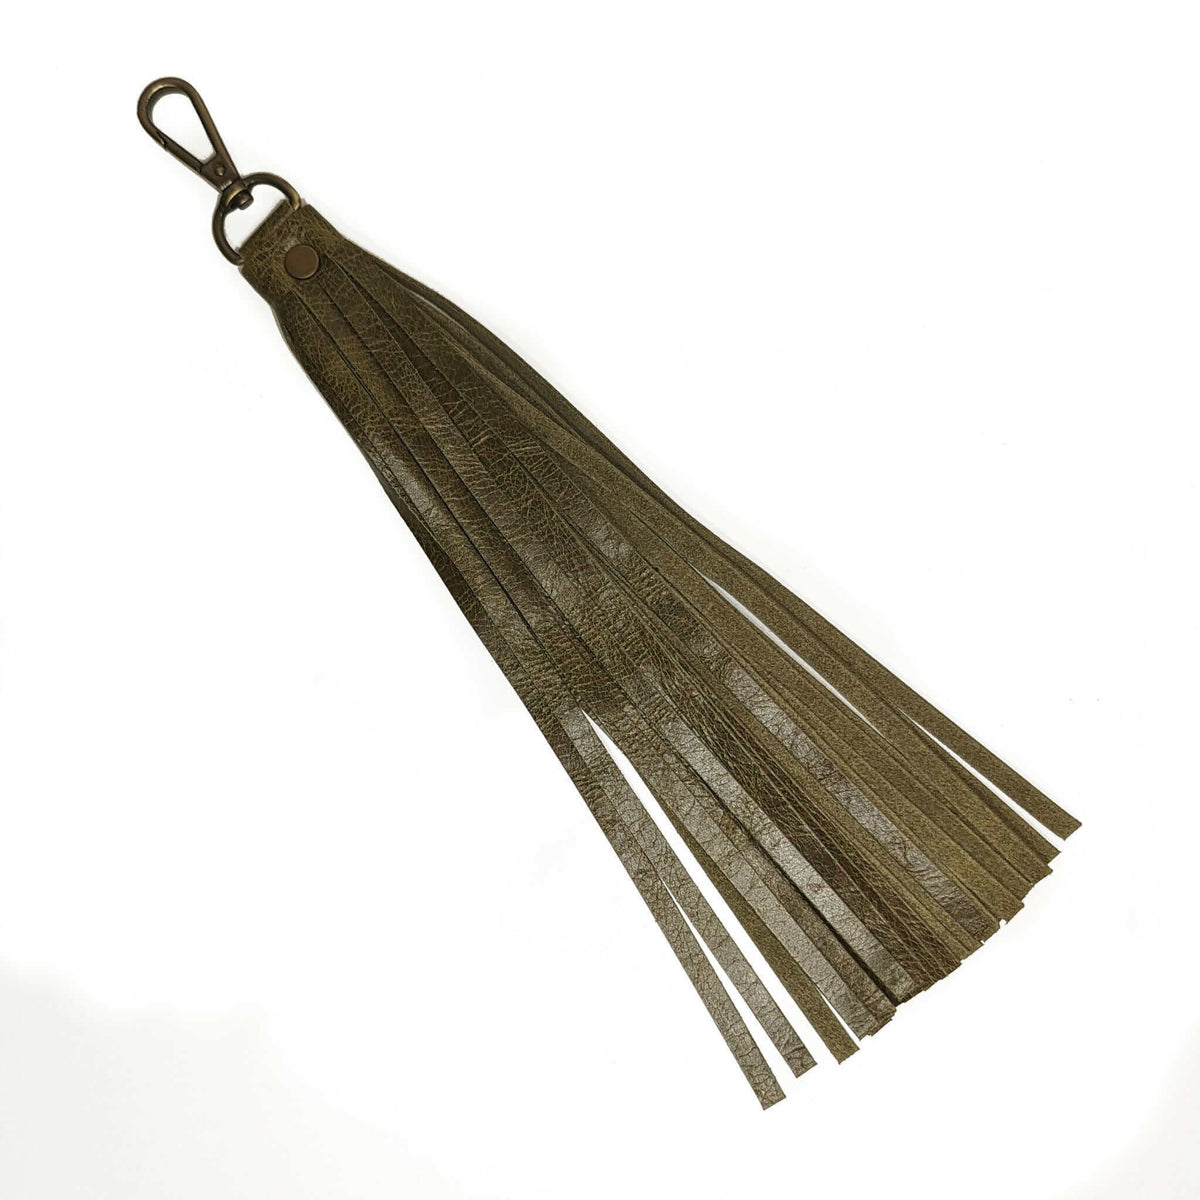 Long leather bag tassel in green, Brynn Capella , Made in the USA